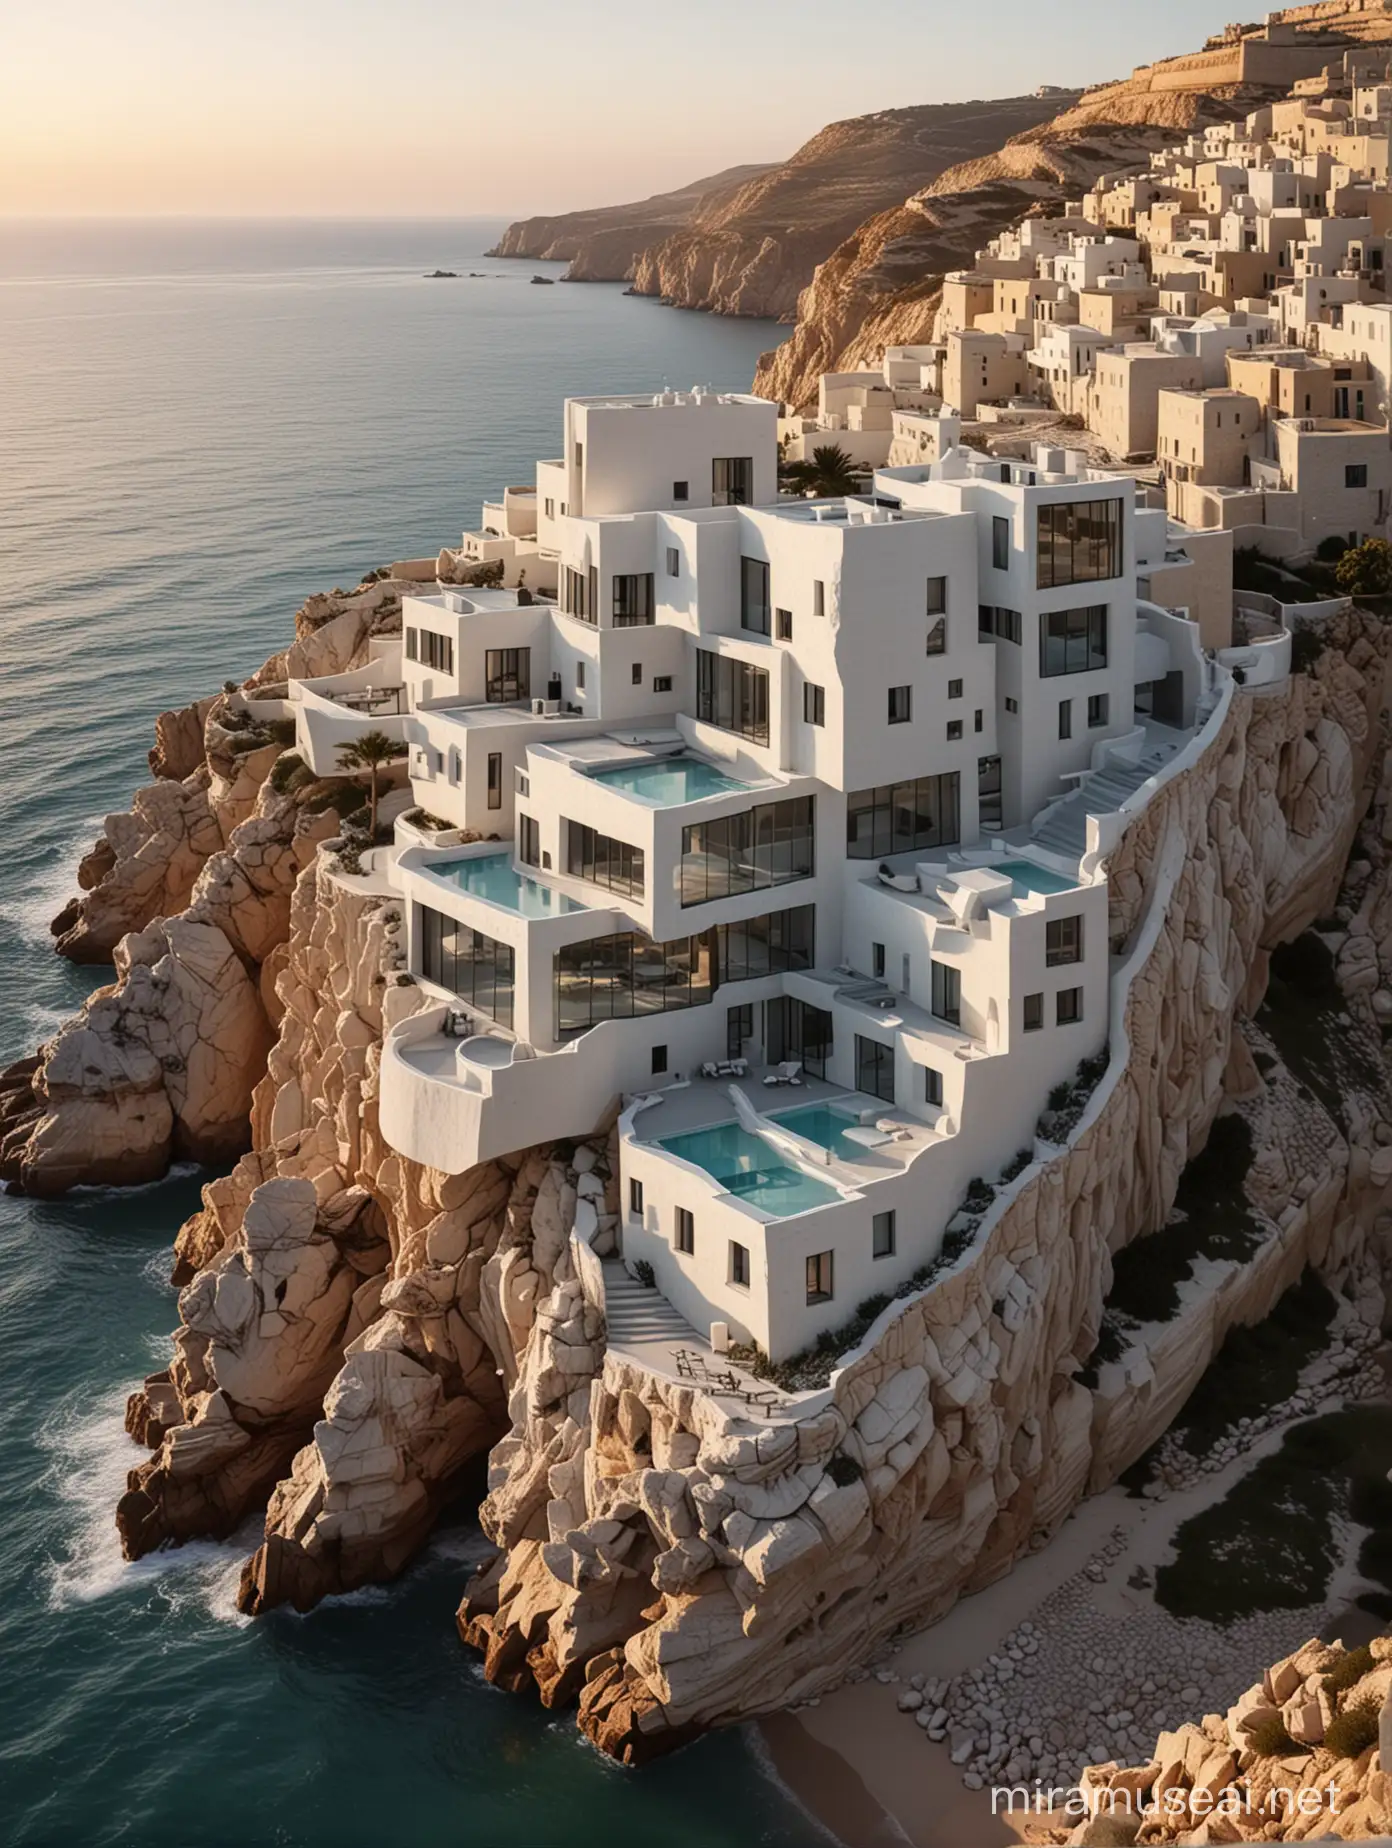 Modern Cubic Architecture by the Sea at Sunset